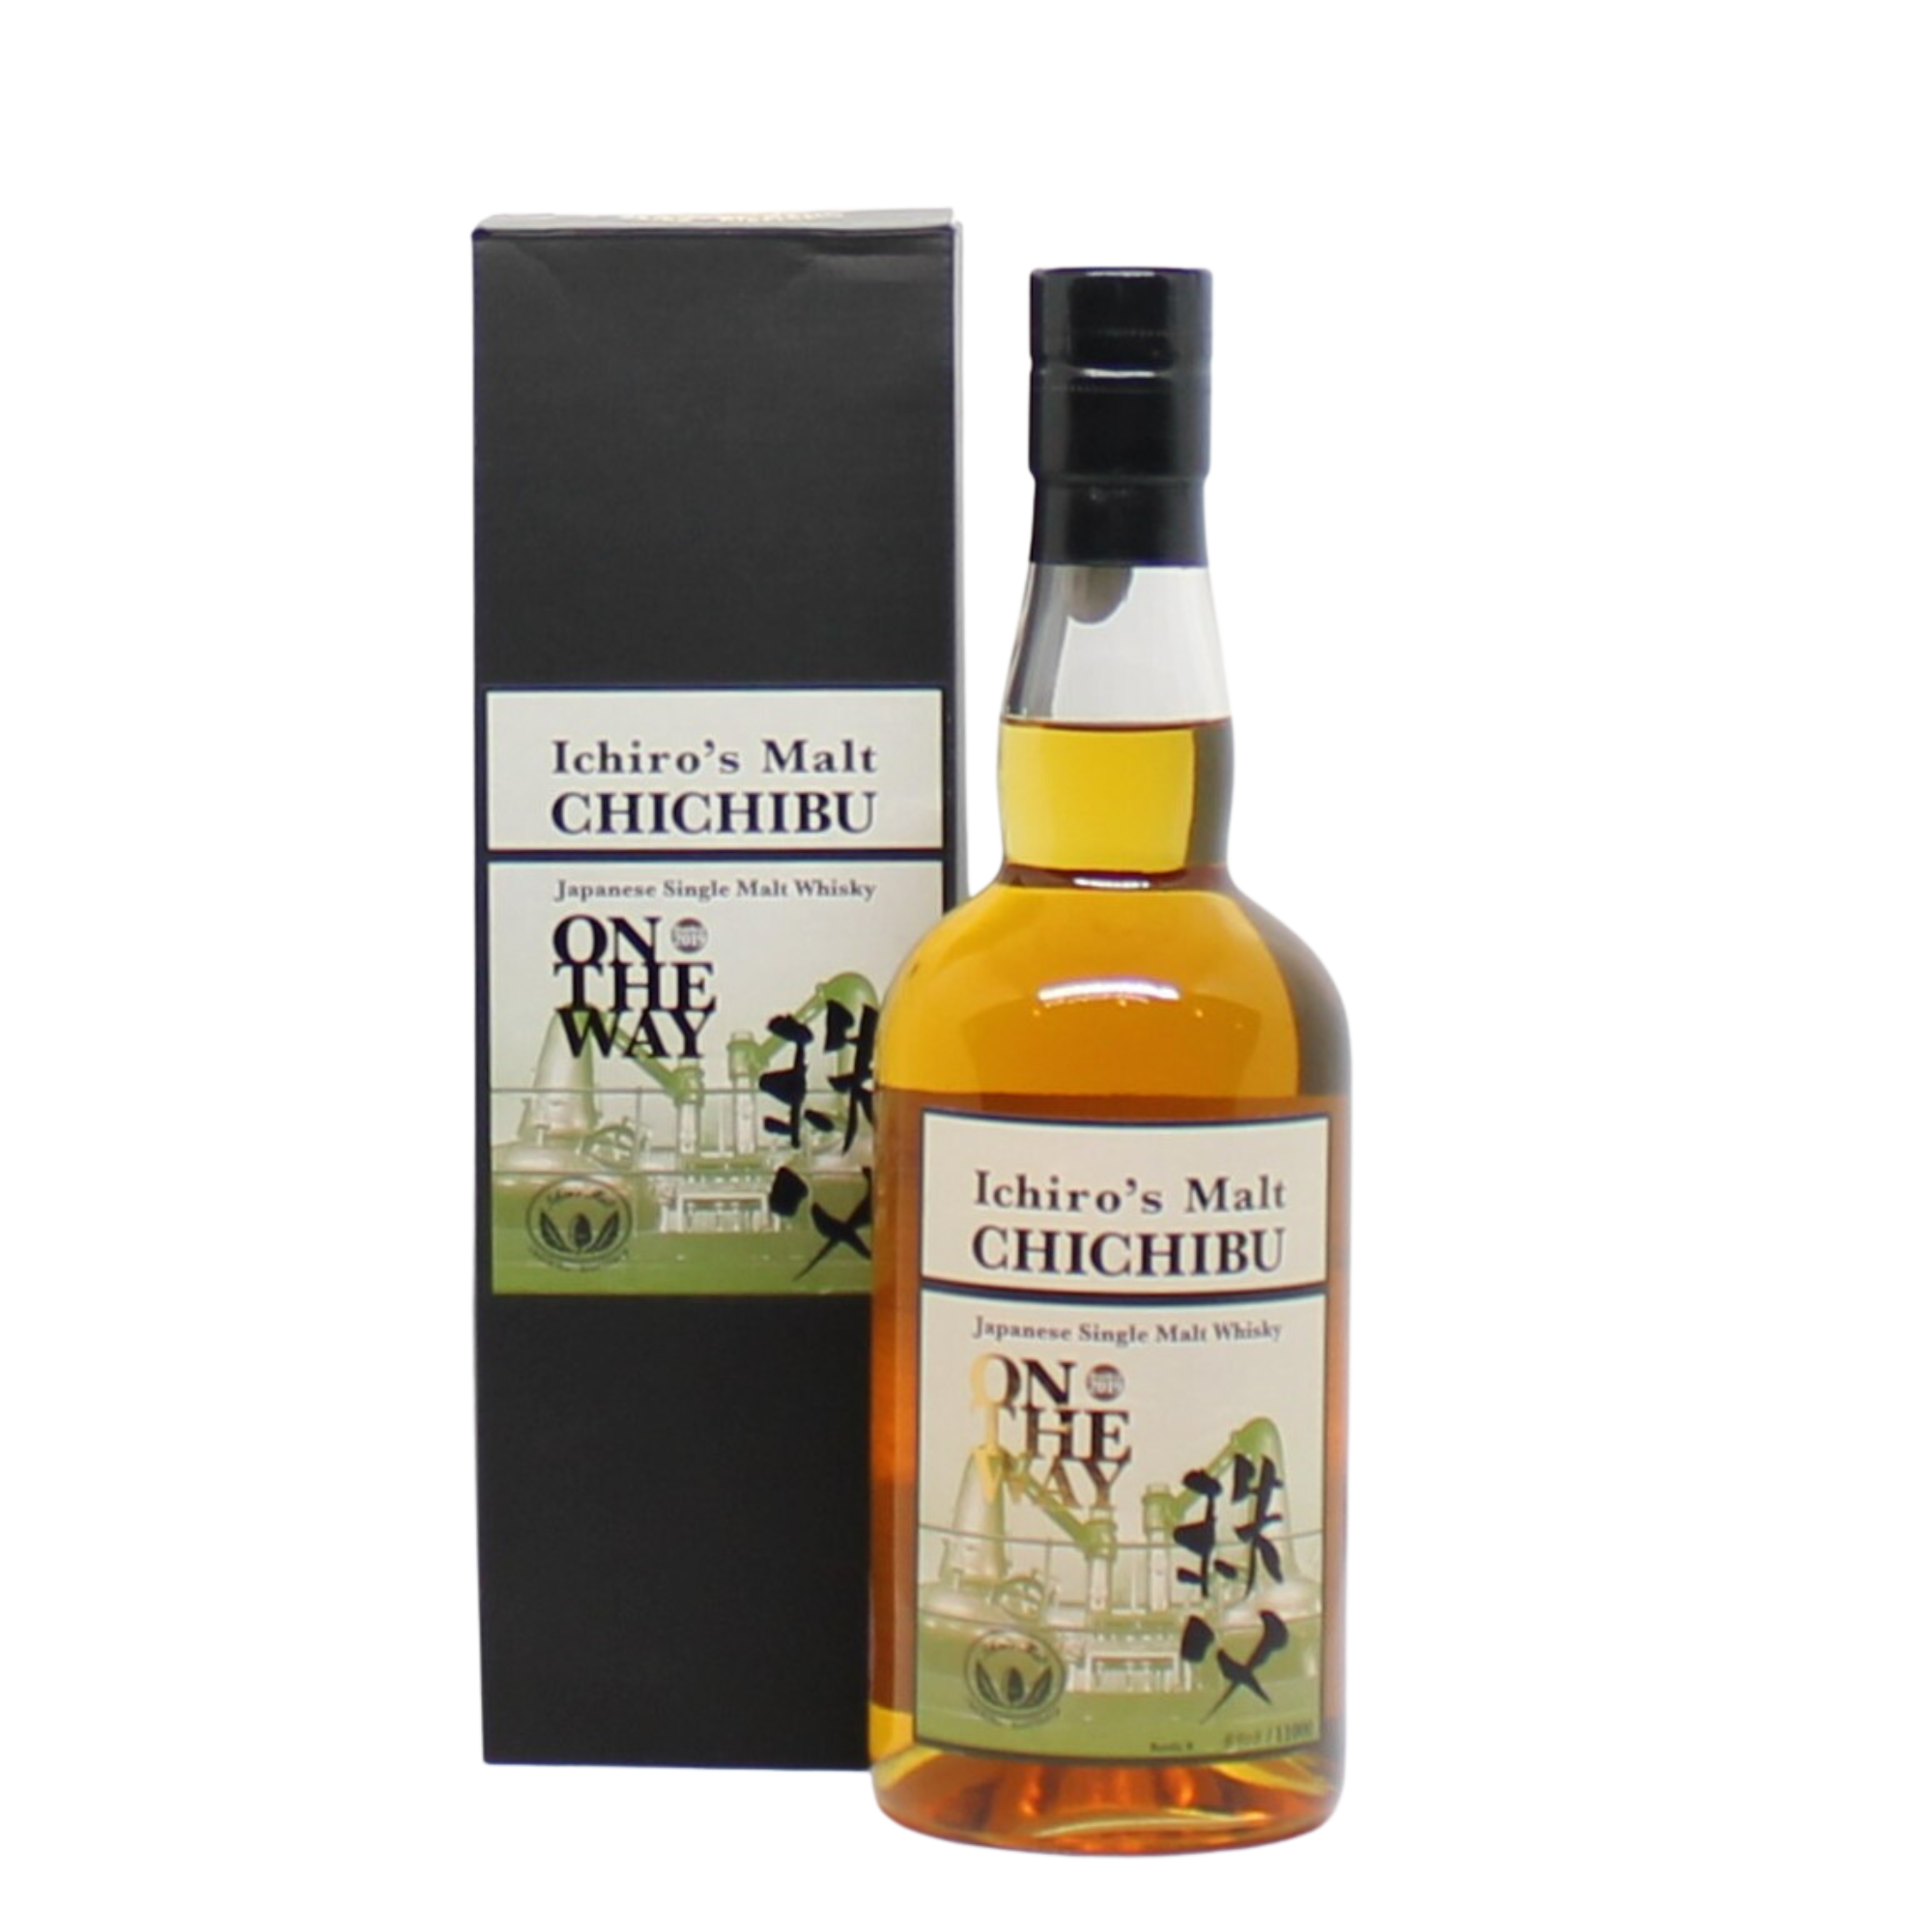 Bottled in 2019. 11,000 Bottles were released. "On The Way" releases of Chichibu are meant to capture the progress of the Distillery as they head towards their first 10 years old Single Malt release in 2020 (a major milestone for the young but very popular distillery). 